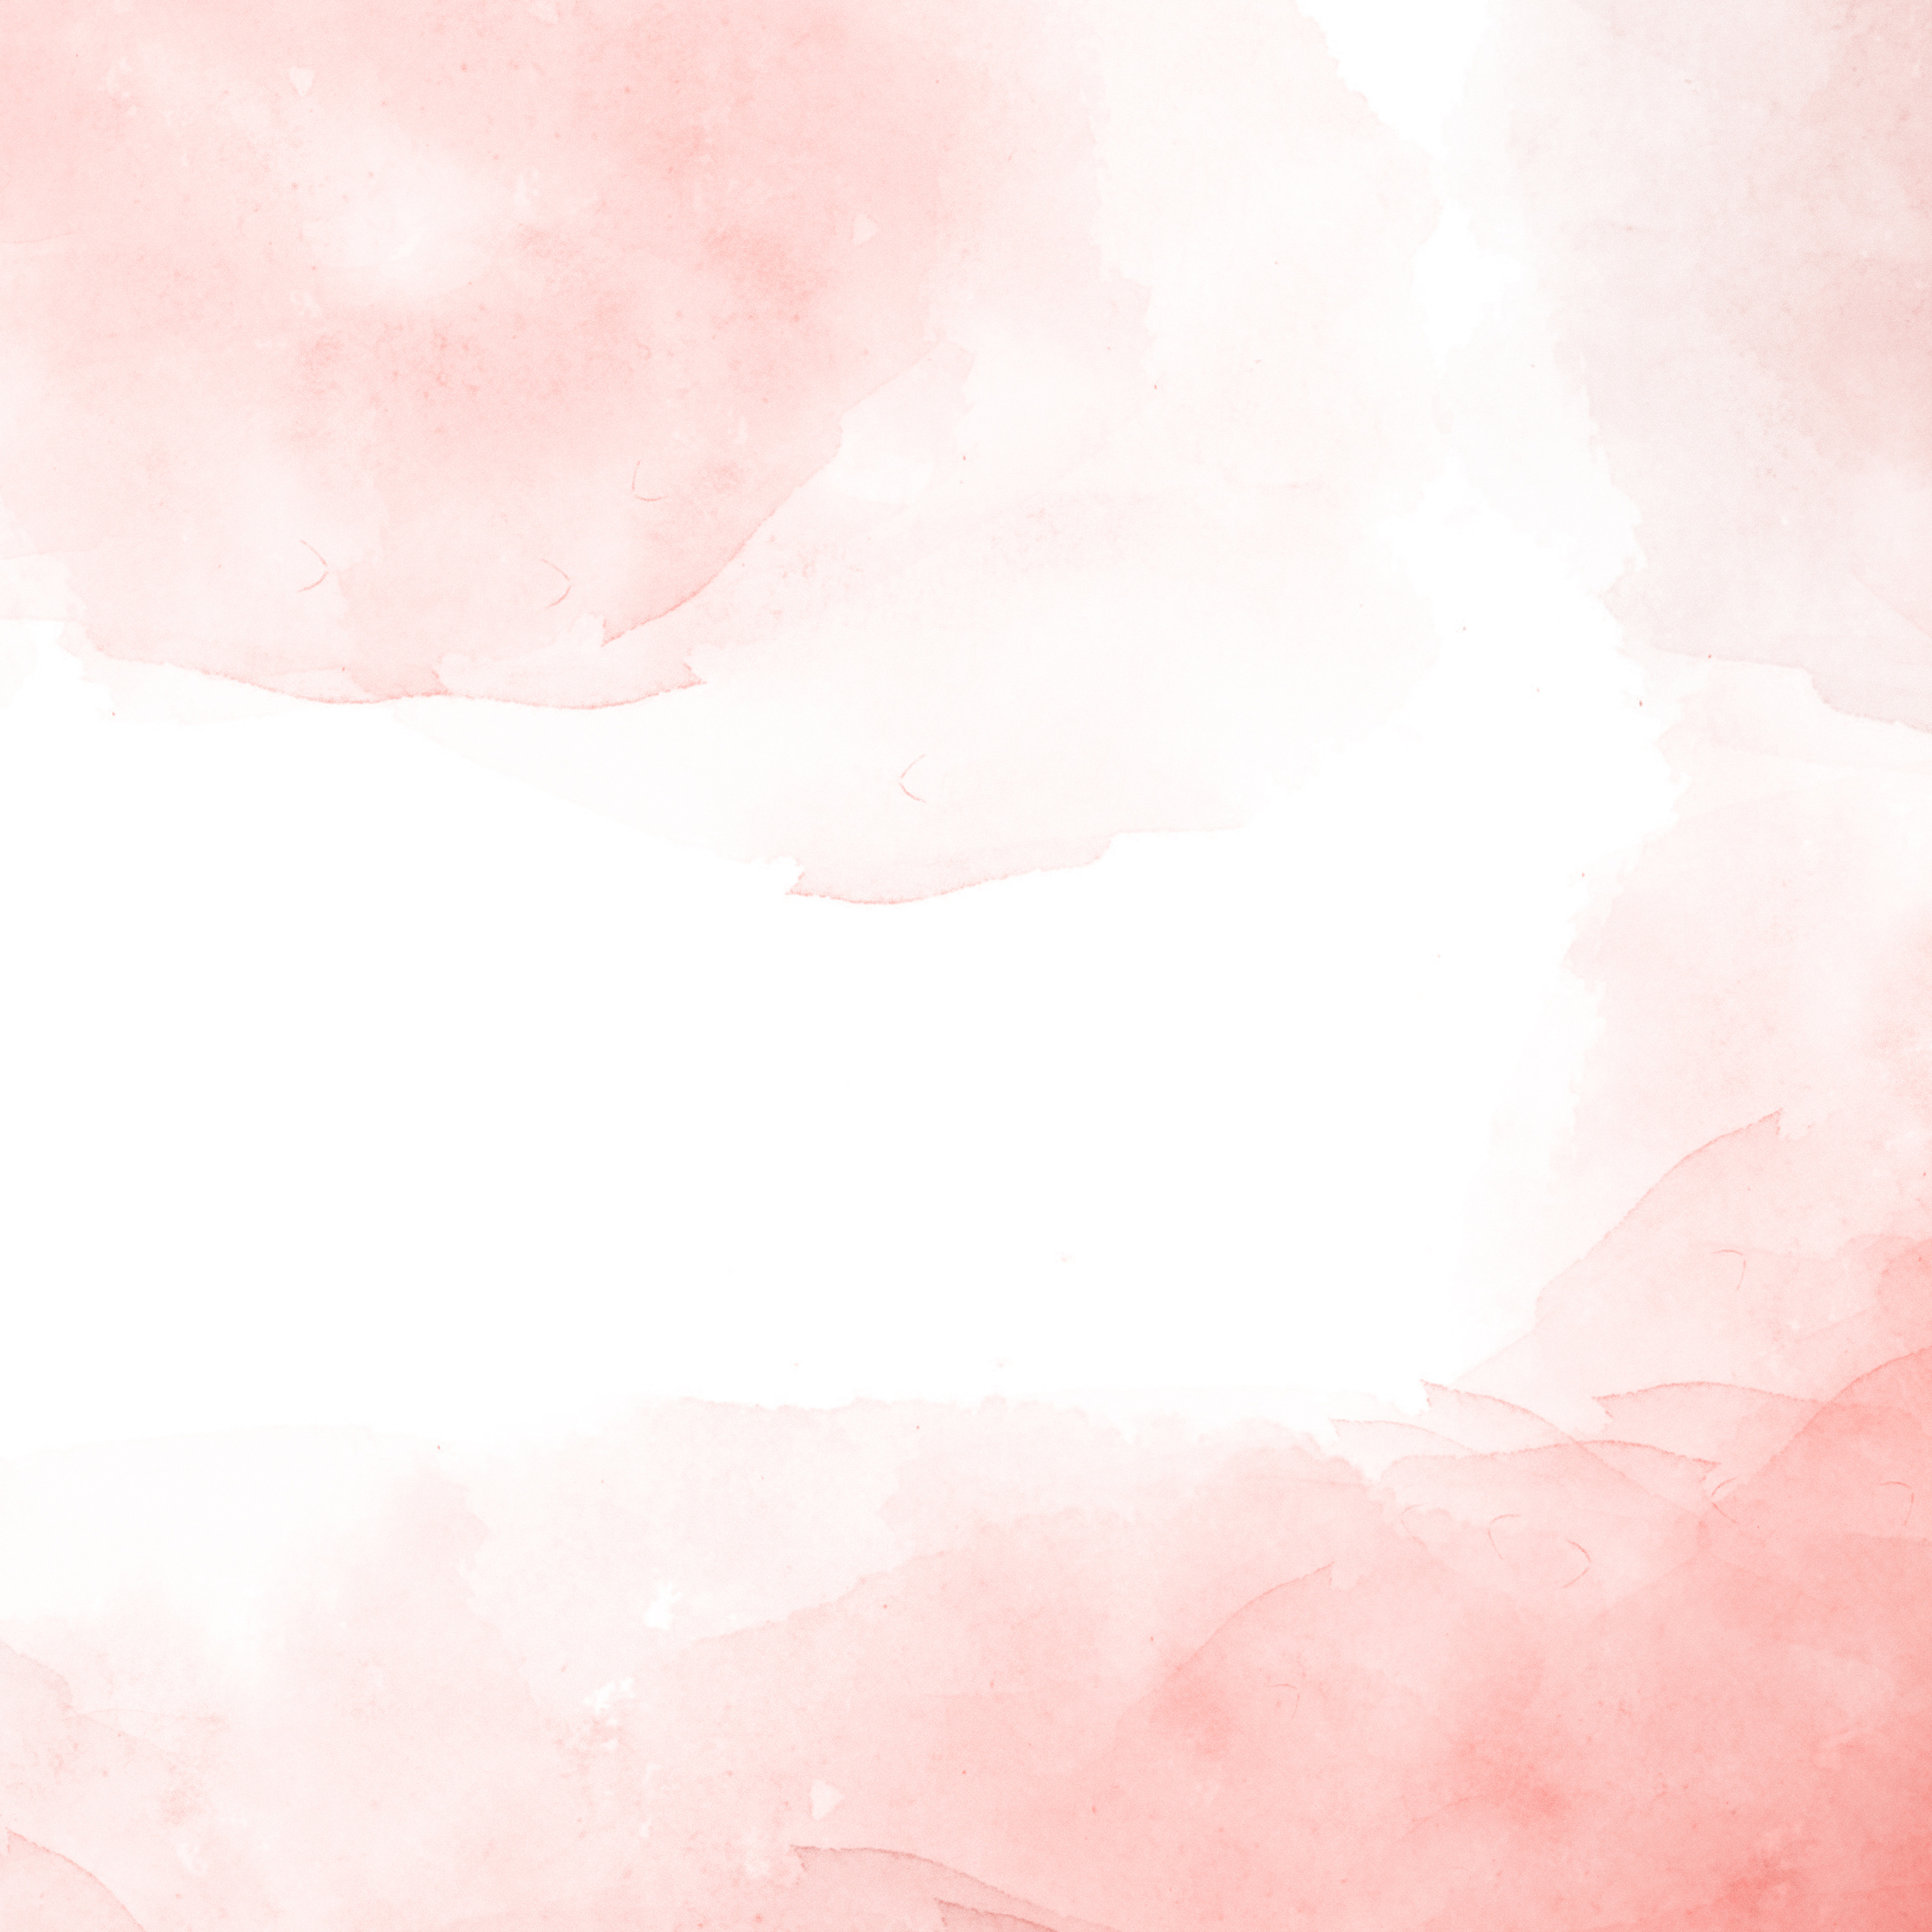 Soft Pink Watercolor Background